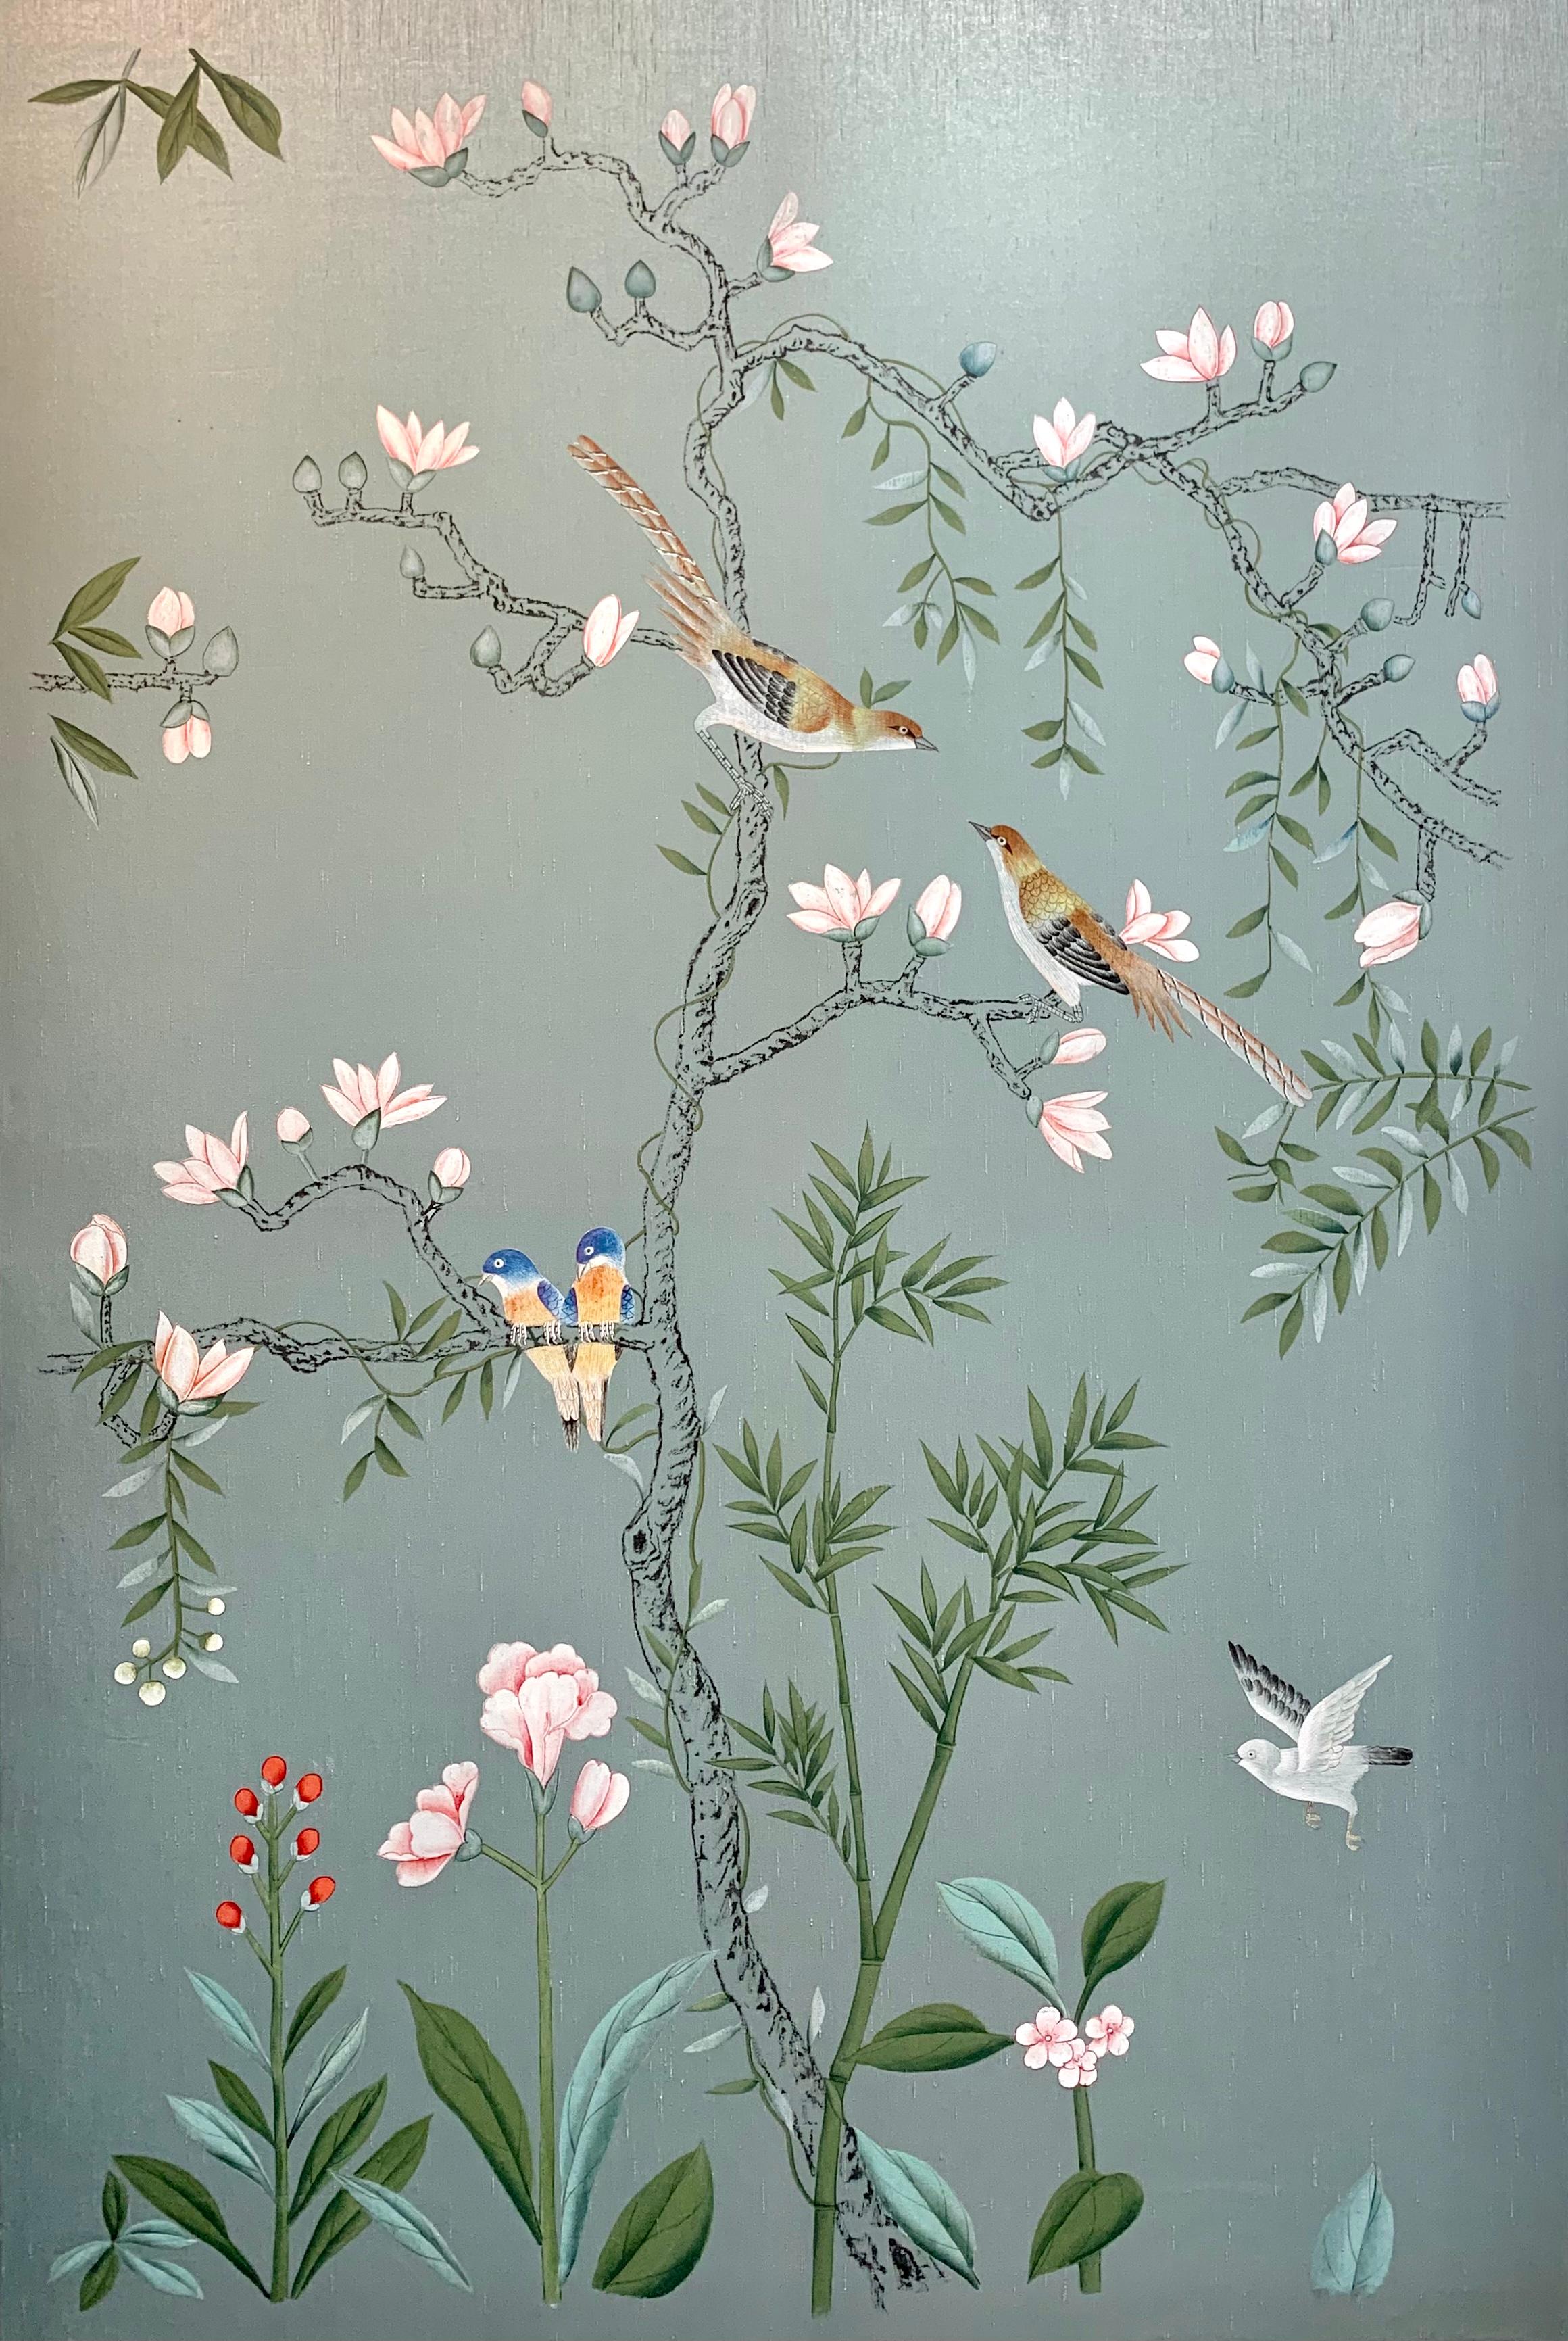 soft morning light is an original painting inspired by chinoiserie. Birds are sitting in the trees reminding us of wallpaper designs by degournay.

Katharina Husslein has started a new body of work looking at rainforests and jungles. These beautiful